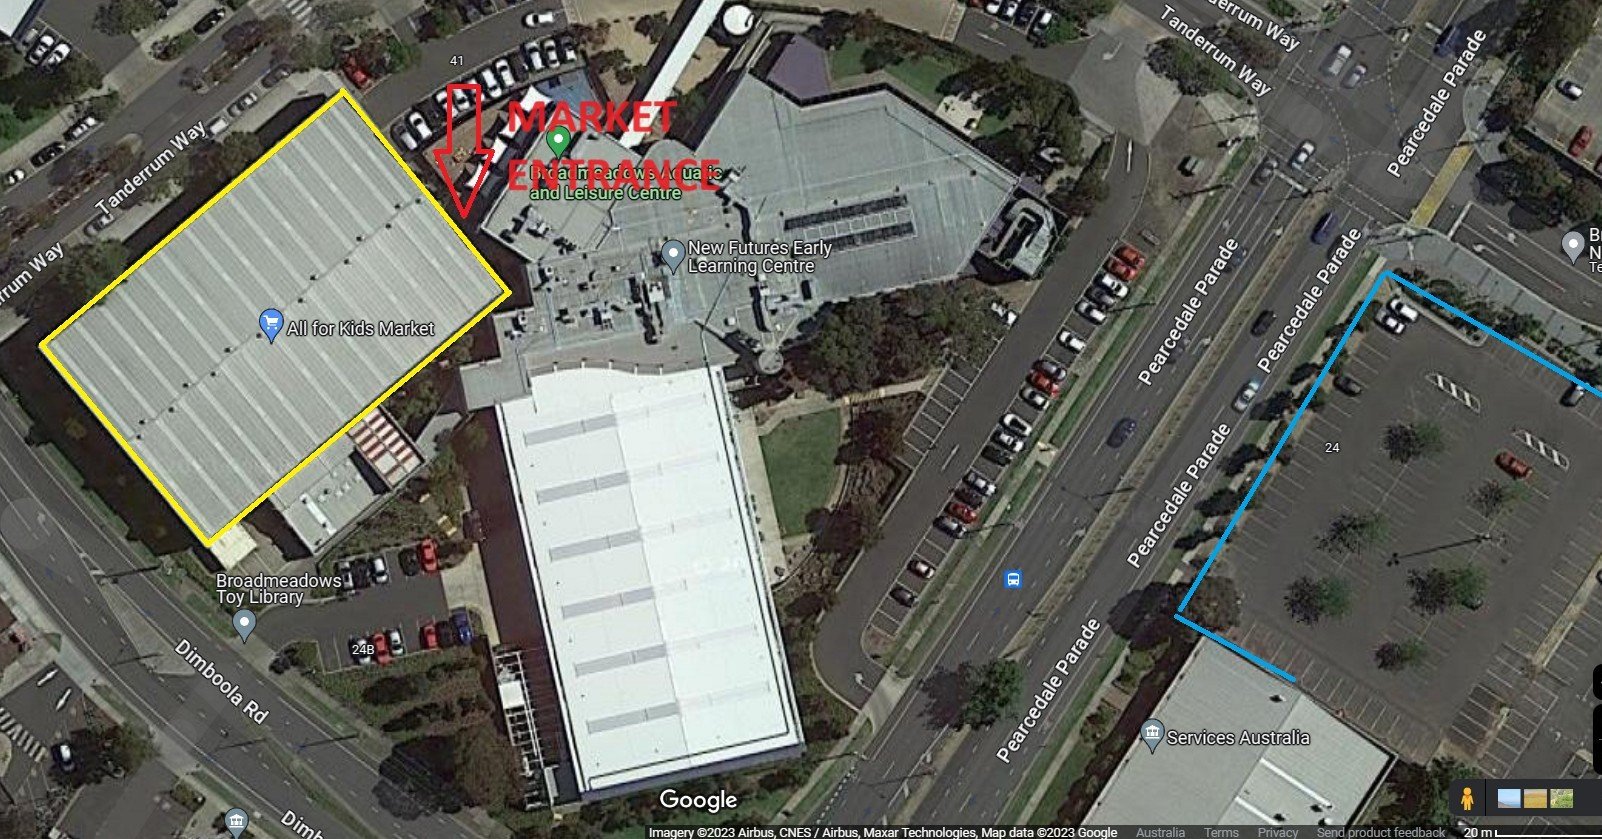 The Melbourne Collectors Market is on TOMORROW. The market is where the yellow box is which is the stadium.

Please check out the google maps images attached so you can plan your day. There are 500+ parking spots within a short 200m walk of the event